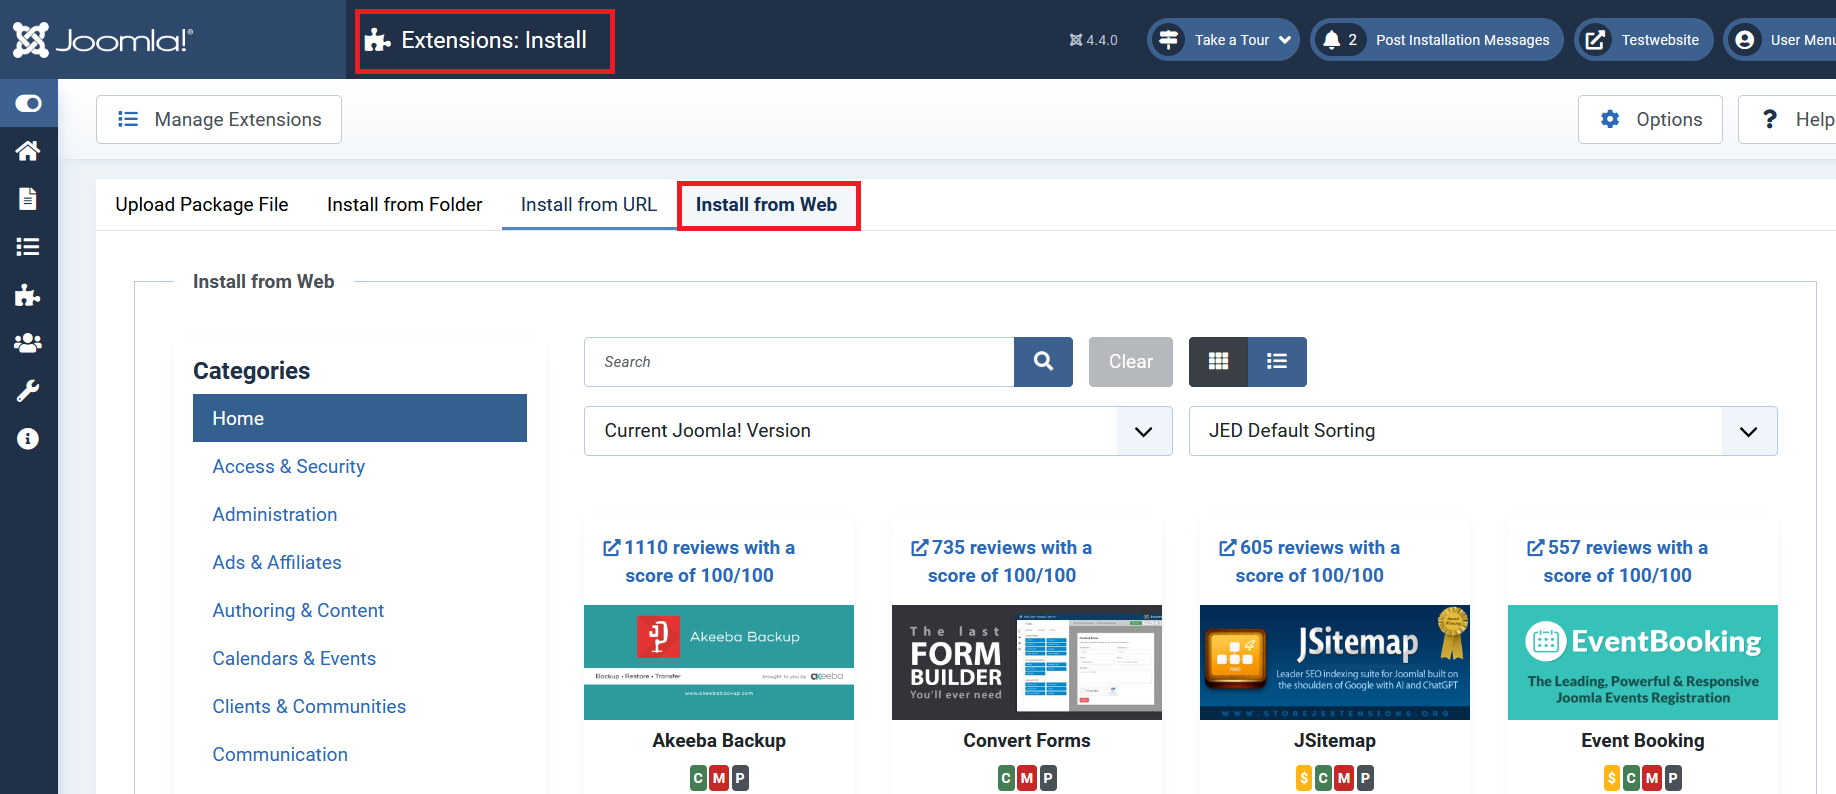 Joomla backend: Extensions available via the web